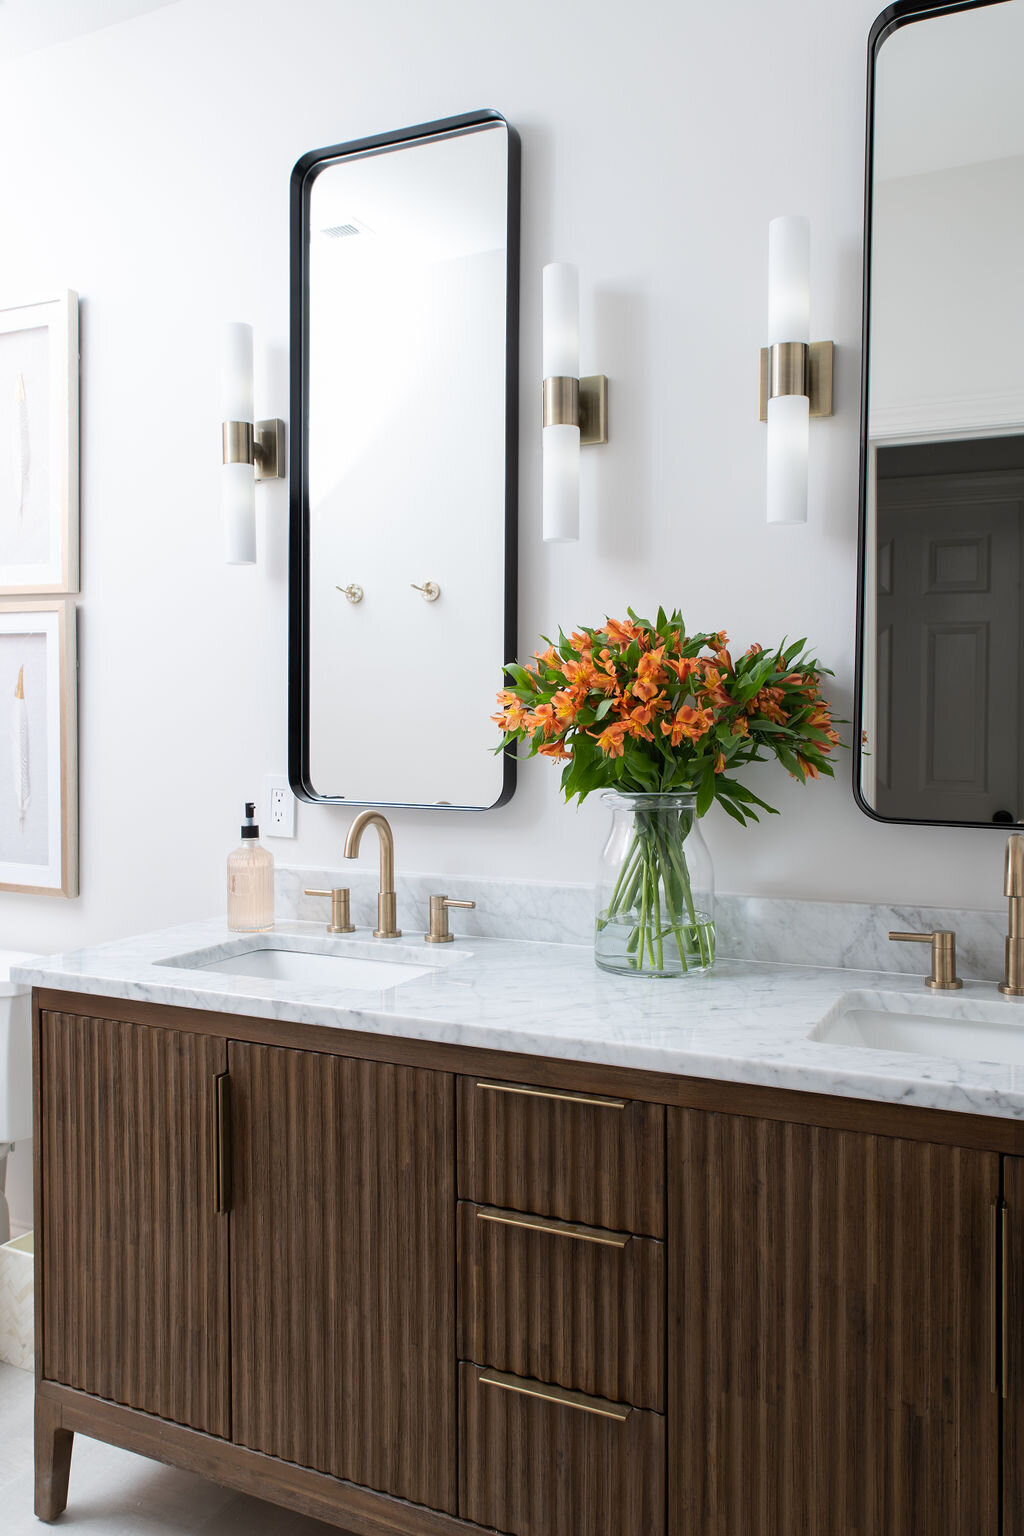 double sinks with white marble countertops and brown cabinetry